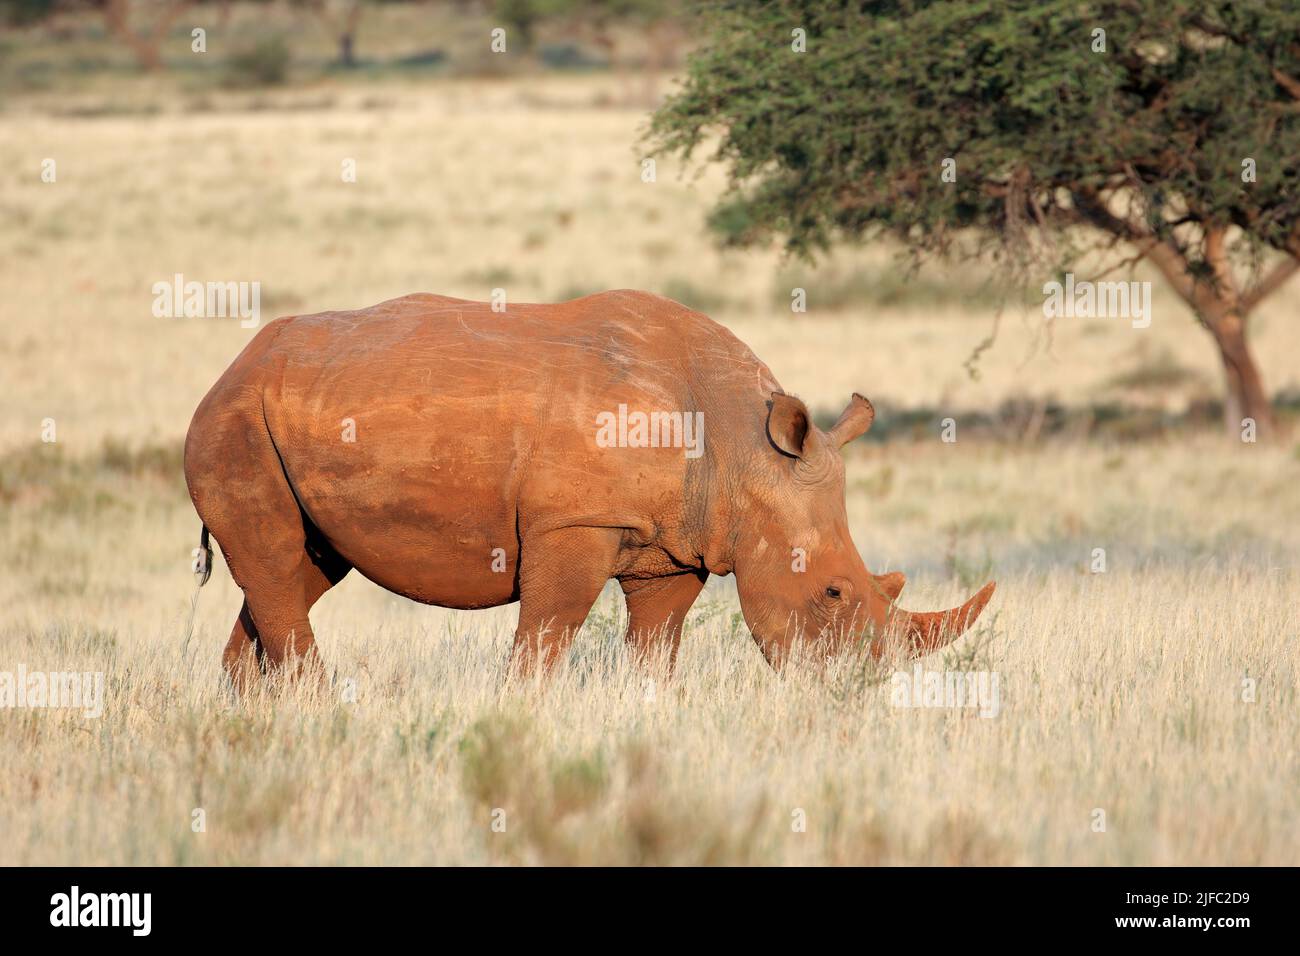 An endangered white rhinoceros (Ceratotherium simum) grazing in grassland, South Africa Stock Photo